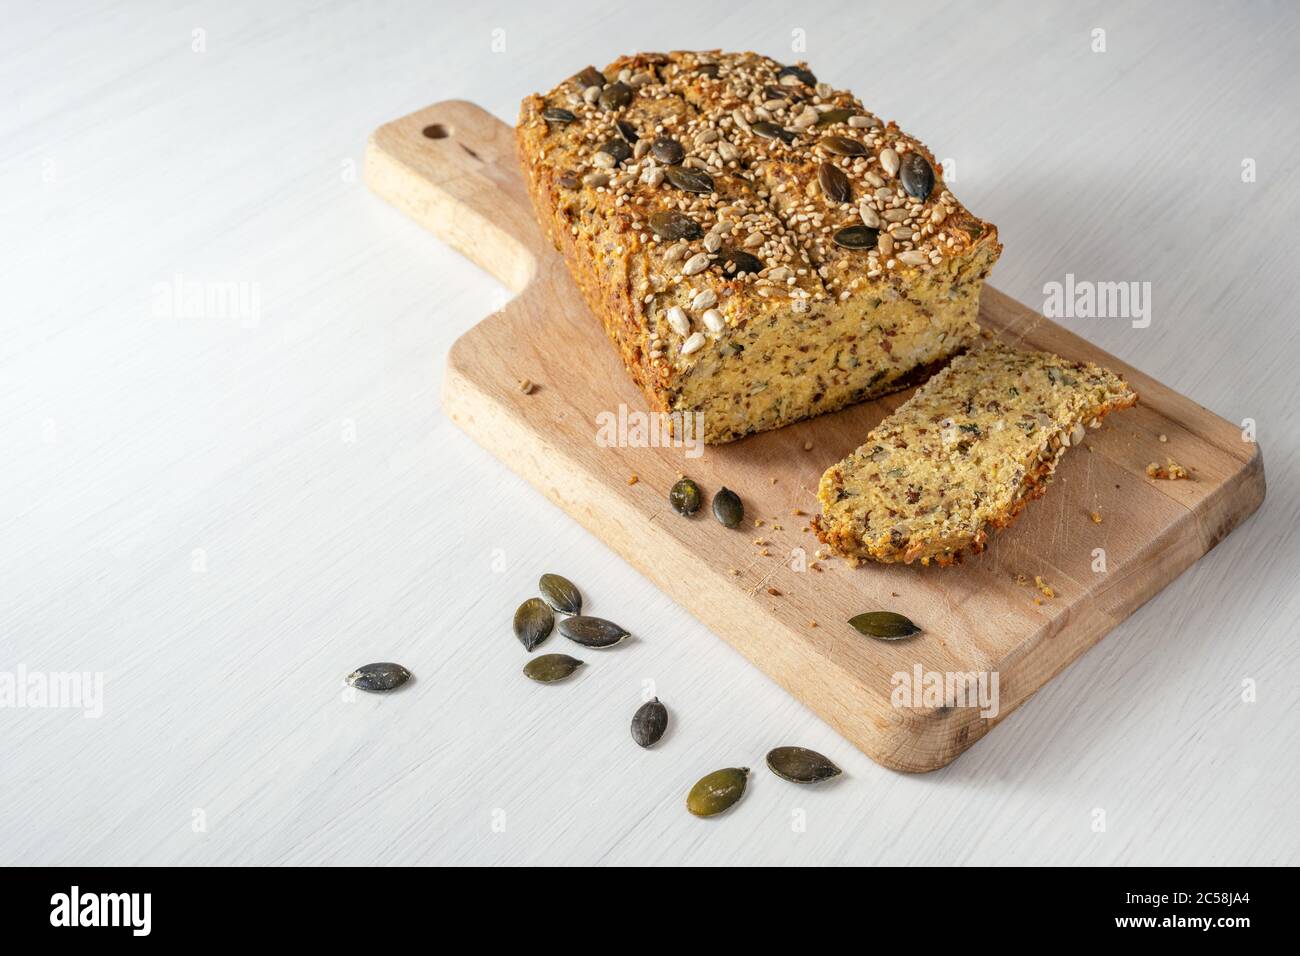 Protein bread from quark, oat bran, lupine flour, almond, pumpkin seeds and other healthy ingredients, baking for low carb or ketogenic diet, wooden c Stock Photo